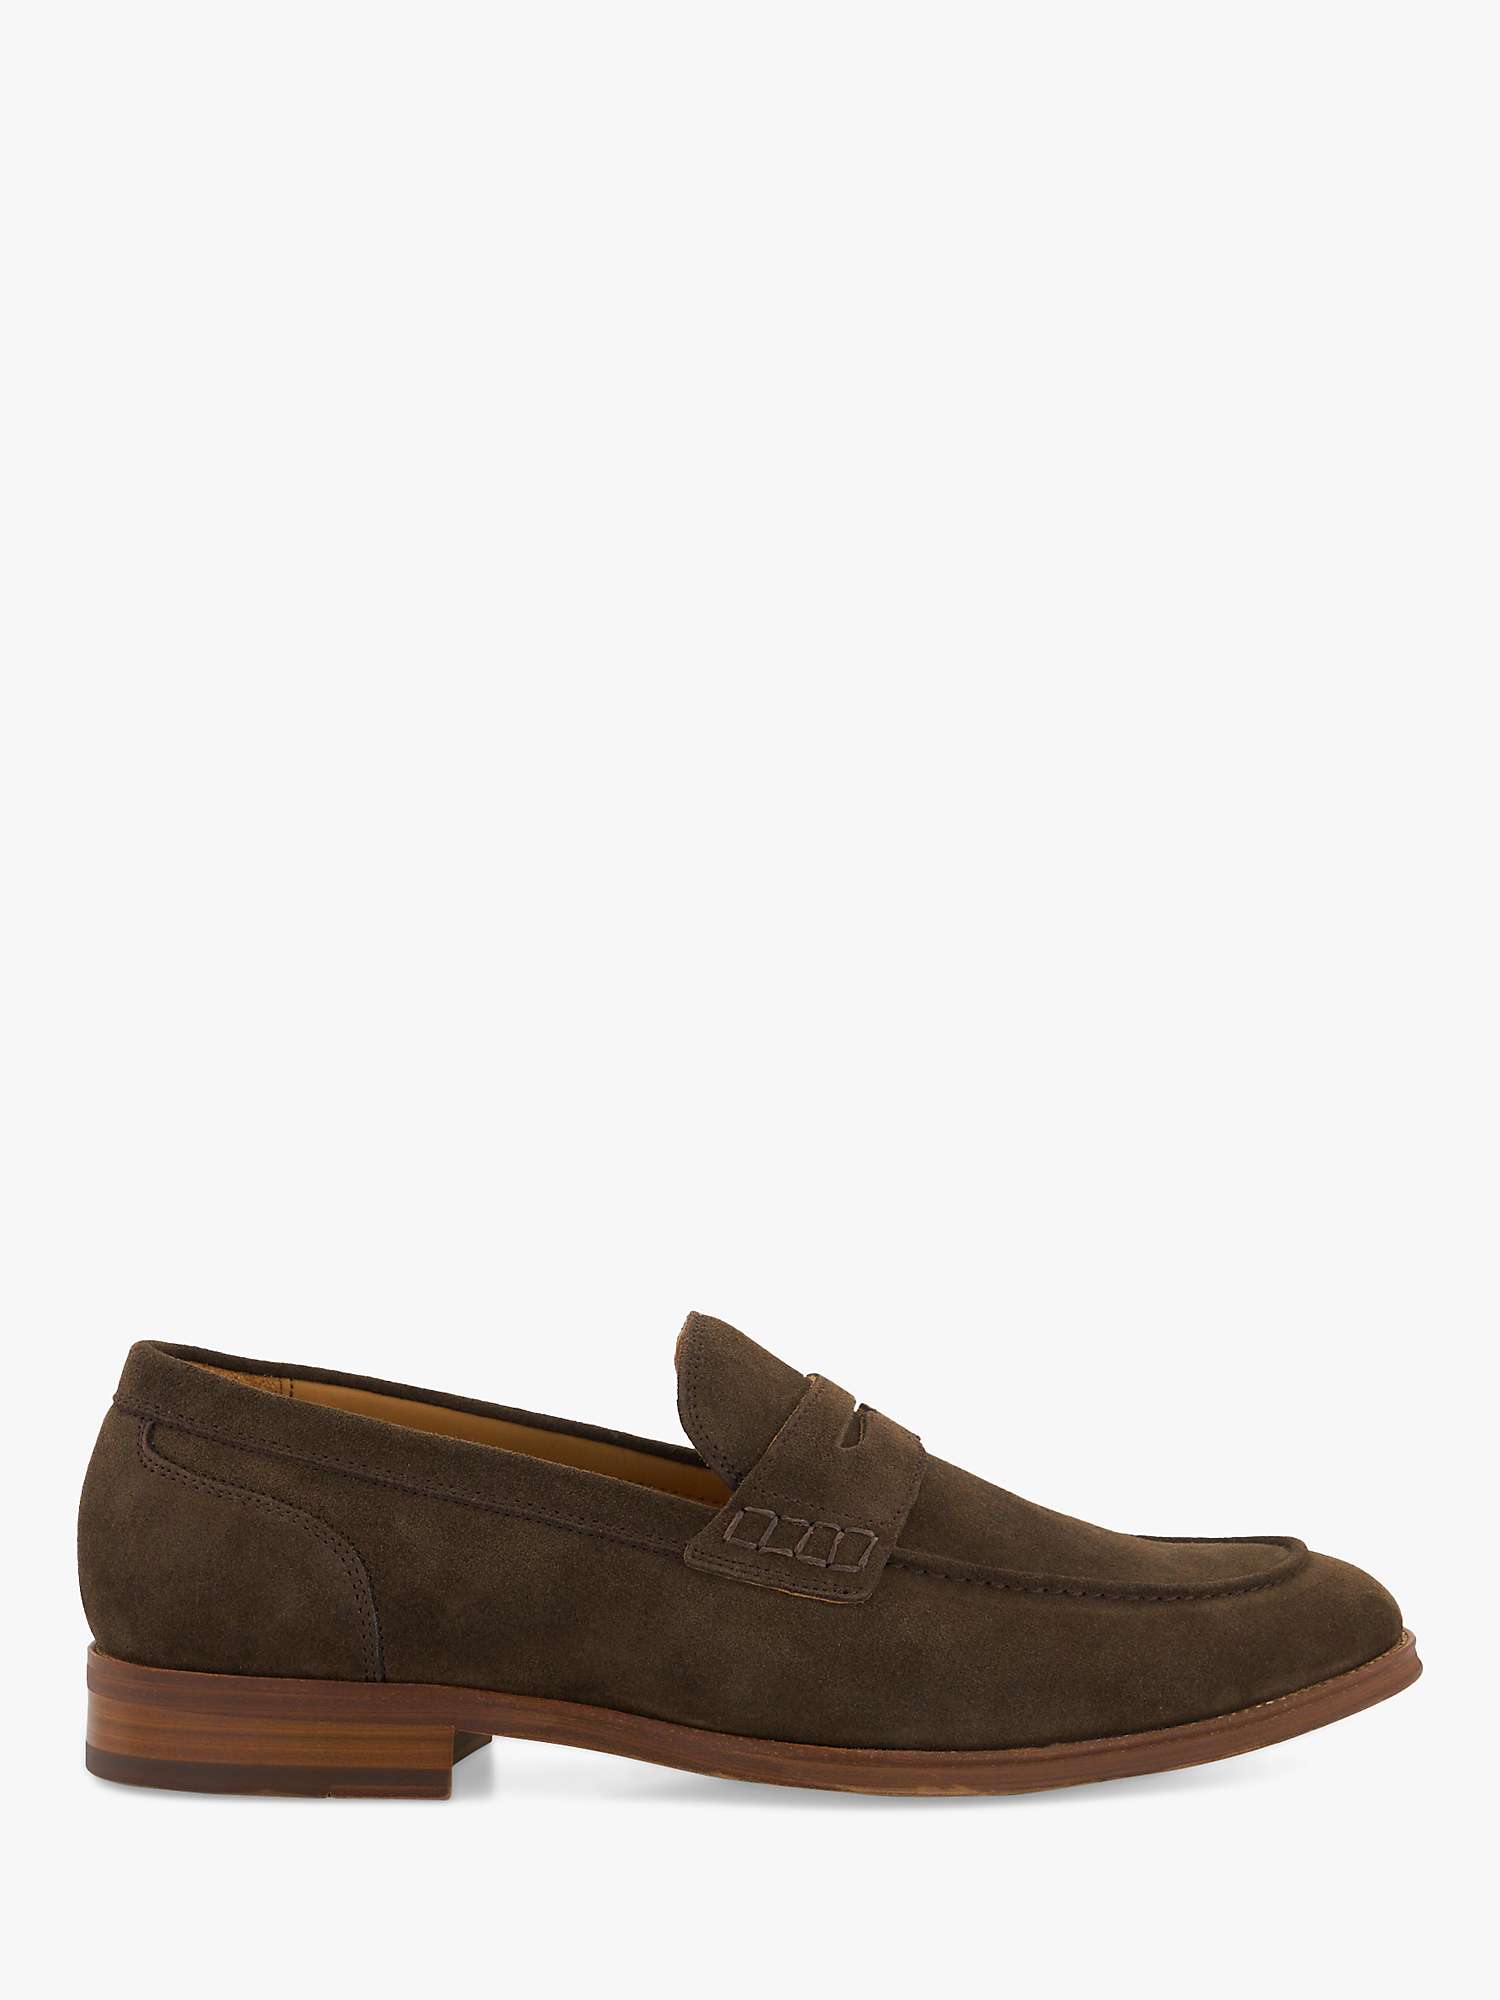 Buy Dune Wide Fit Sulli Suede Penny Loafers, Brown Online at johnlewis.com